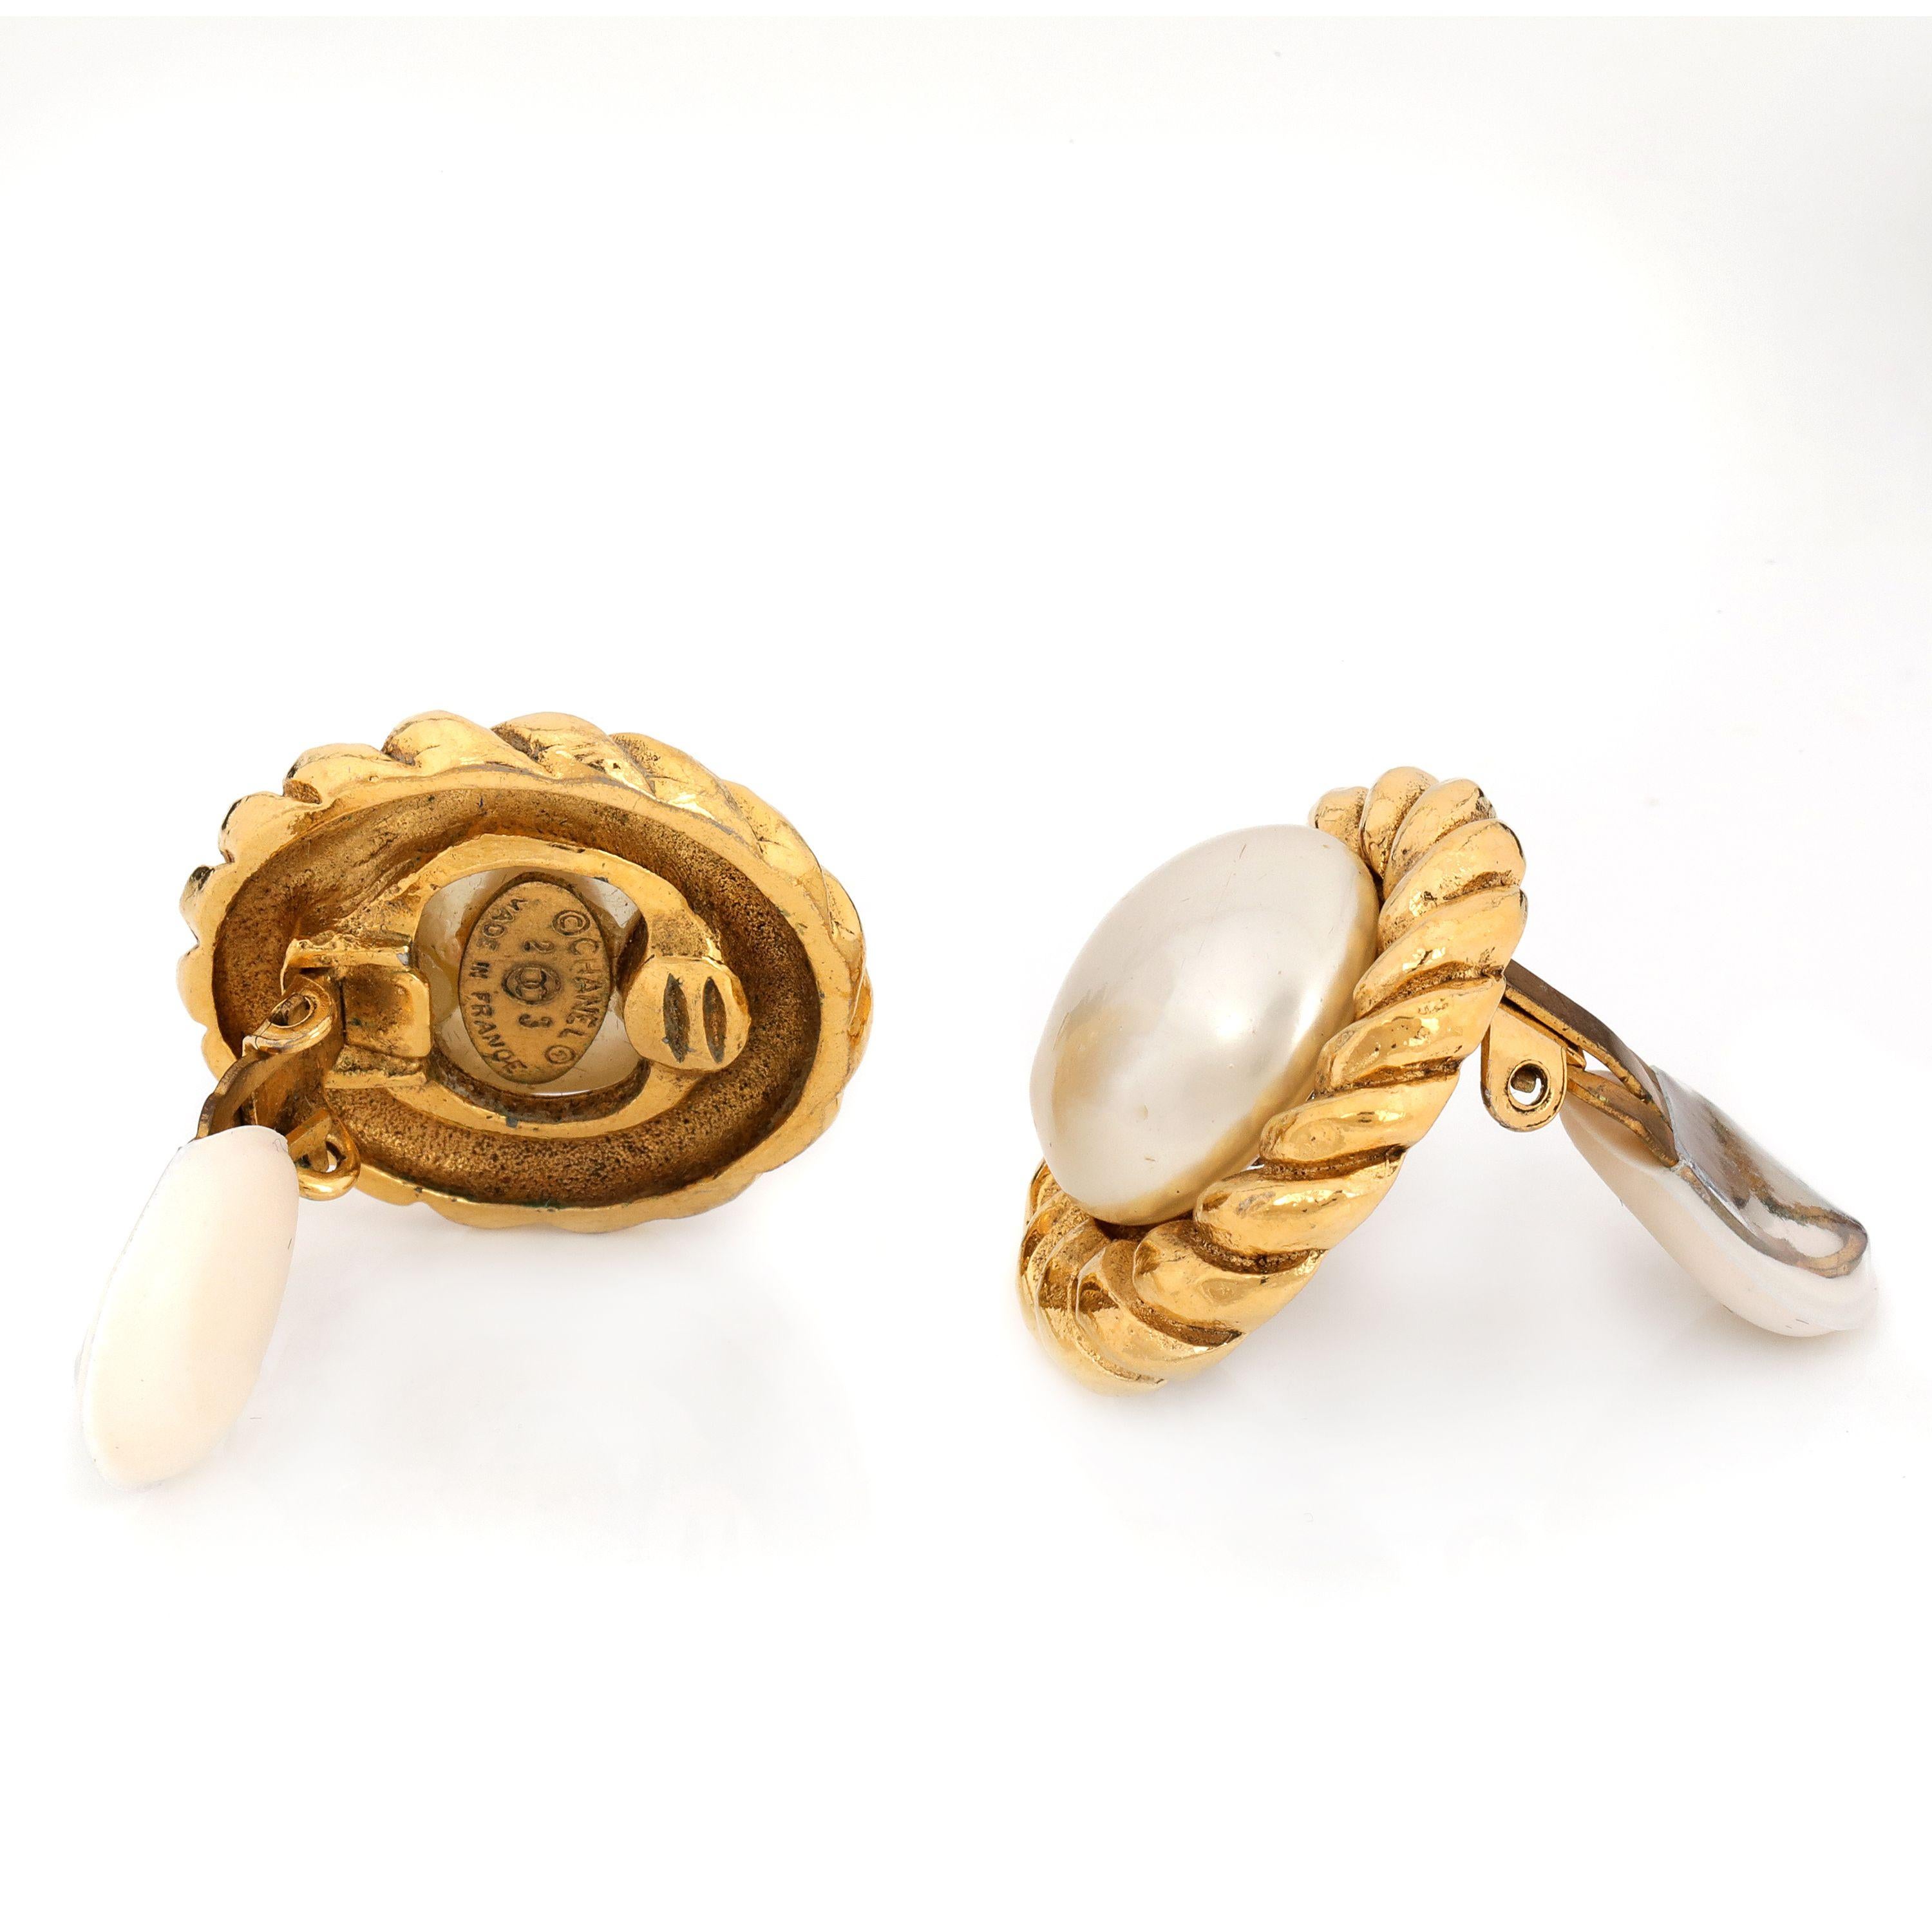 These authentic Chanel Pearl Button Gold Rope Clip On Earrings are in excellent vintage condition from the 1980’s.  Large faux pearl centers are surrounded with gold tone rope design.  Clip on style.  Made in France. Pouch or box included.  

PBF